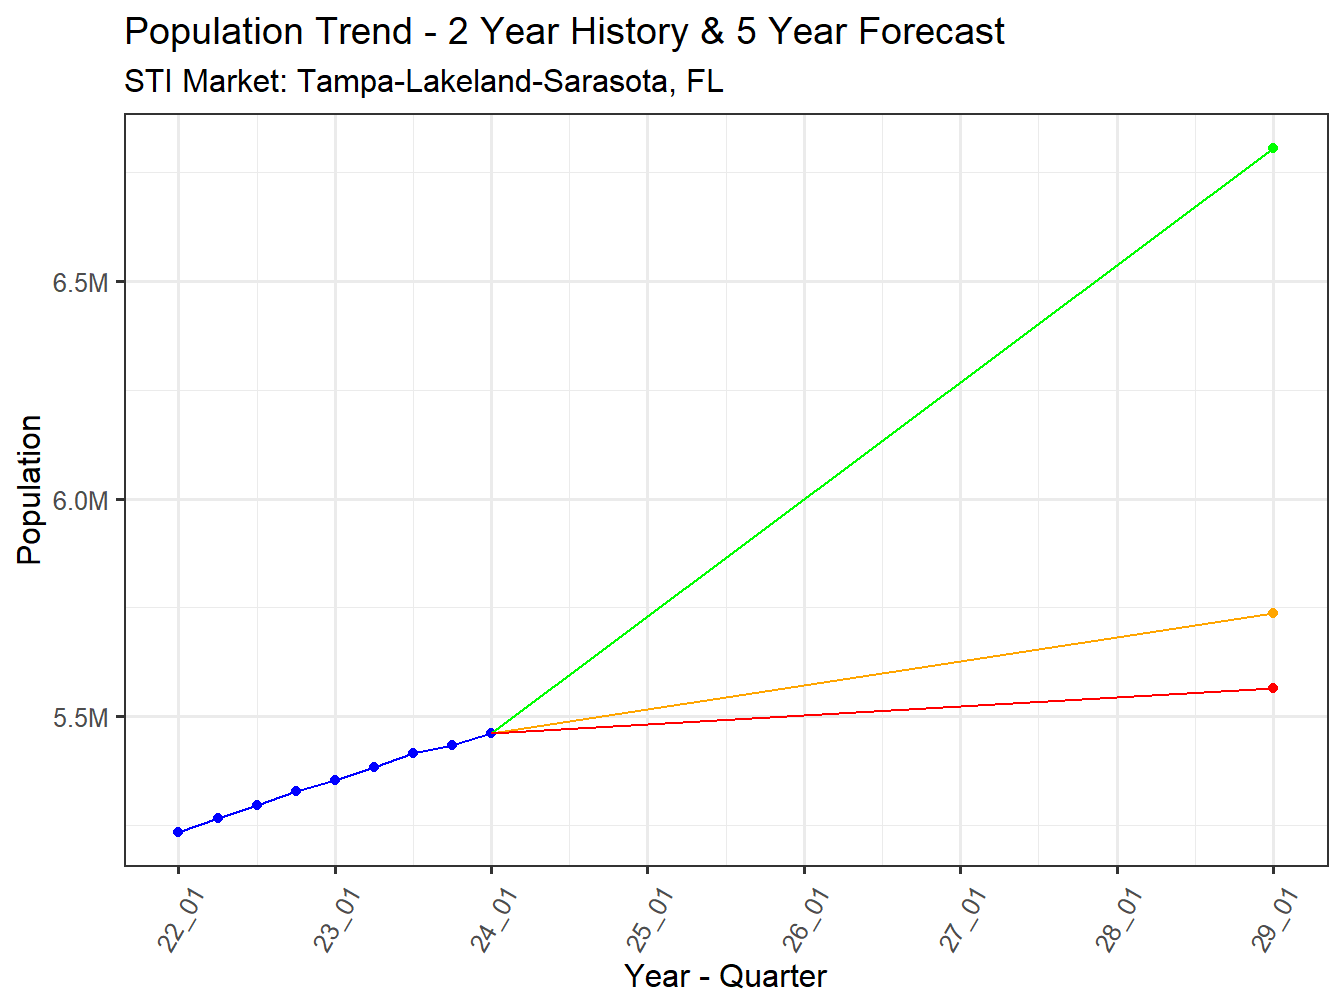 Population Trend and Forecast